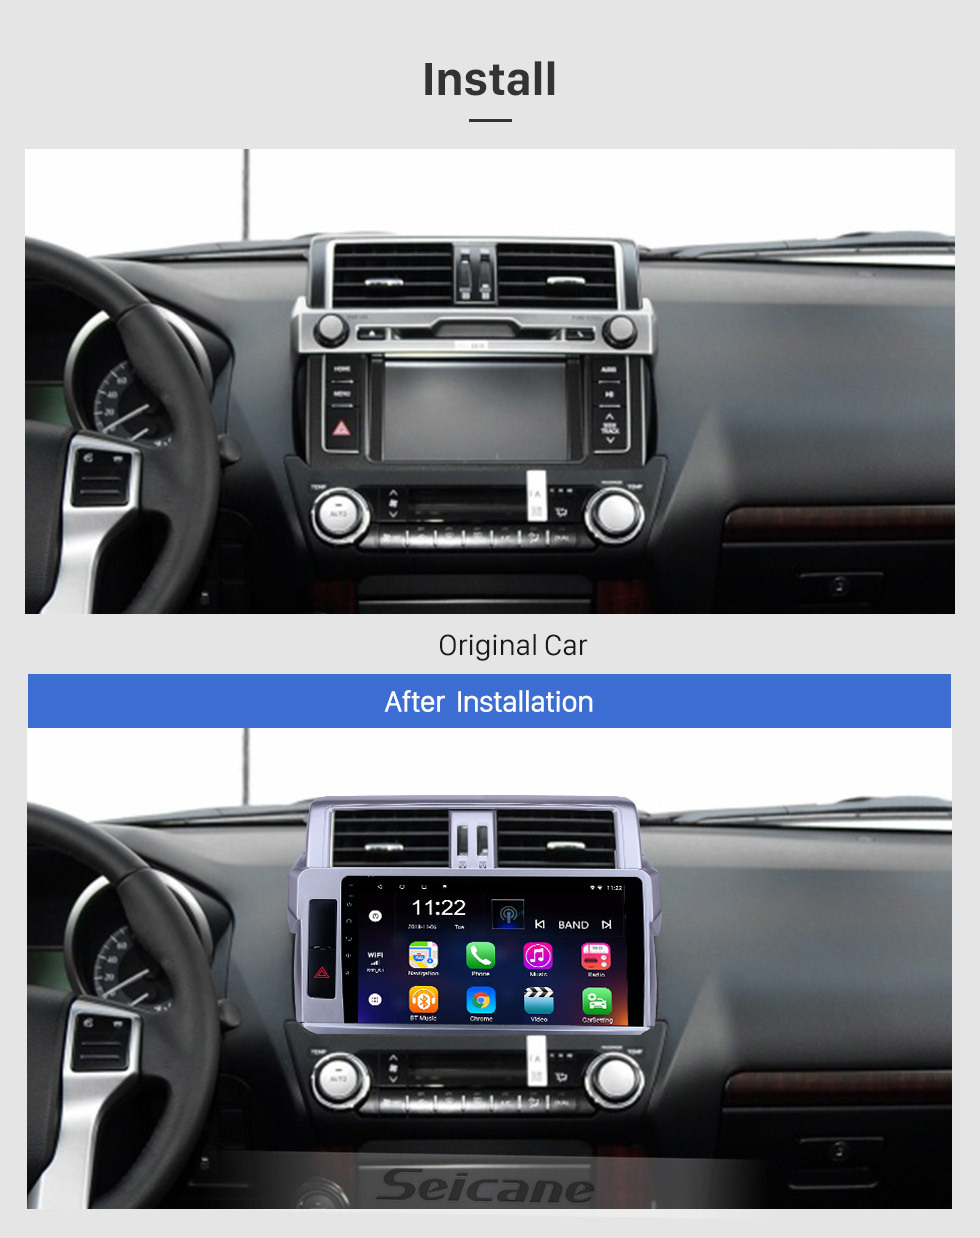 Seicane 10.1 inch GPS Navigation Radio Android 12.0 for 2014 2015-2017 Toyota Prado With HD Touchscreen Bluetooth support Carplay Backup camera